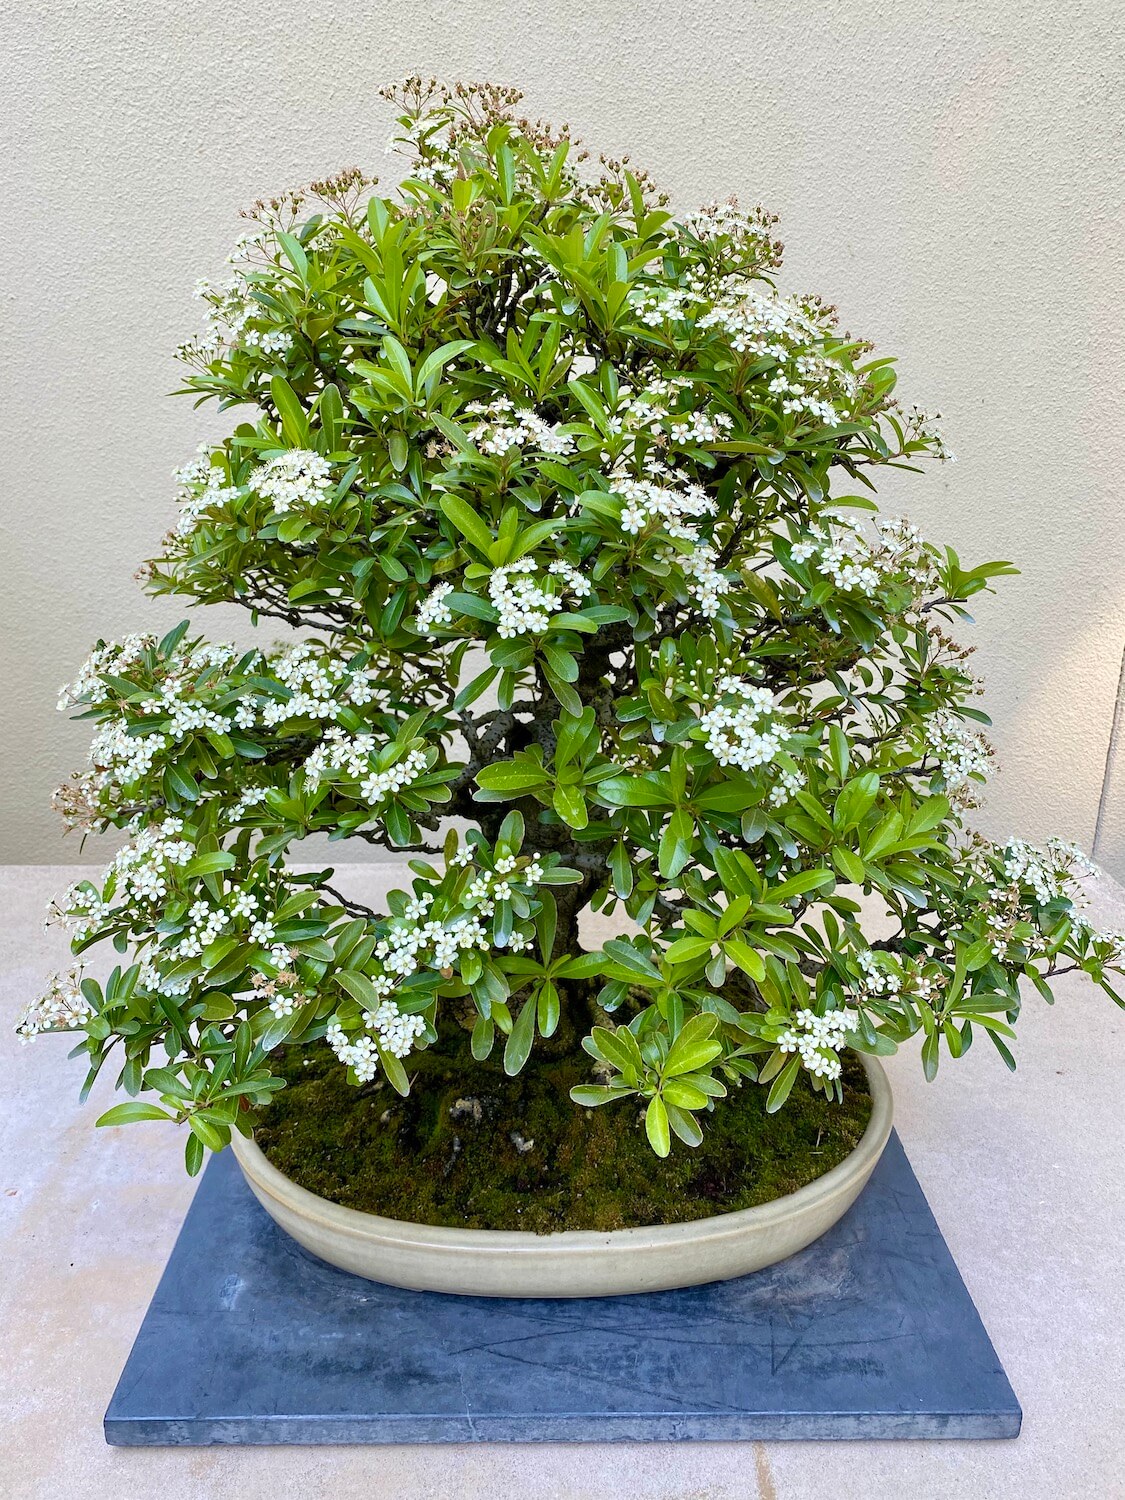 This miniature bush features showy white blooms in tiny clumps amongst the lime green waxy leaves.  The tree is held in a beige clay pot and tucked in with a mix of green and yellow moss.  